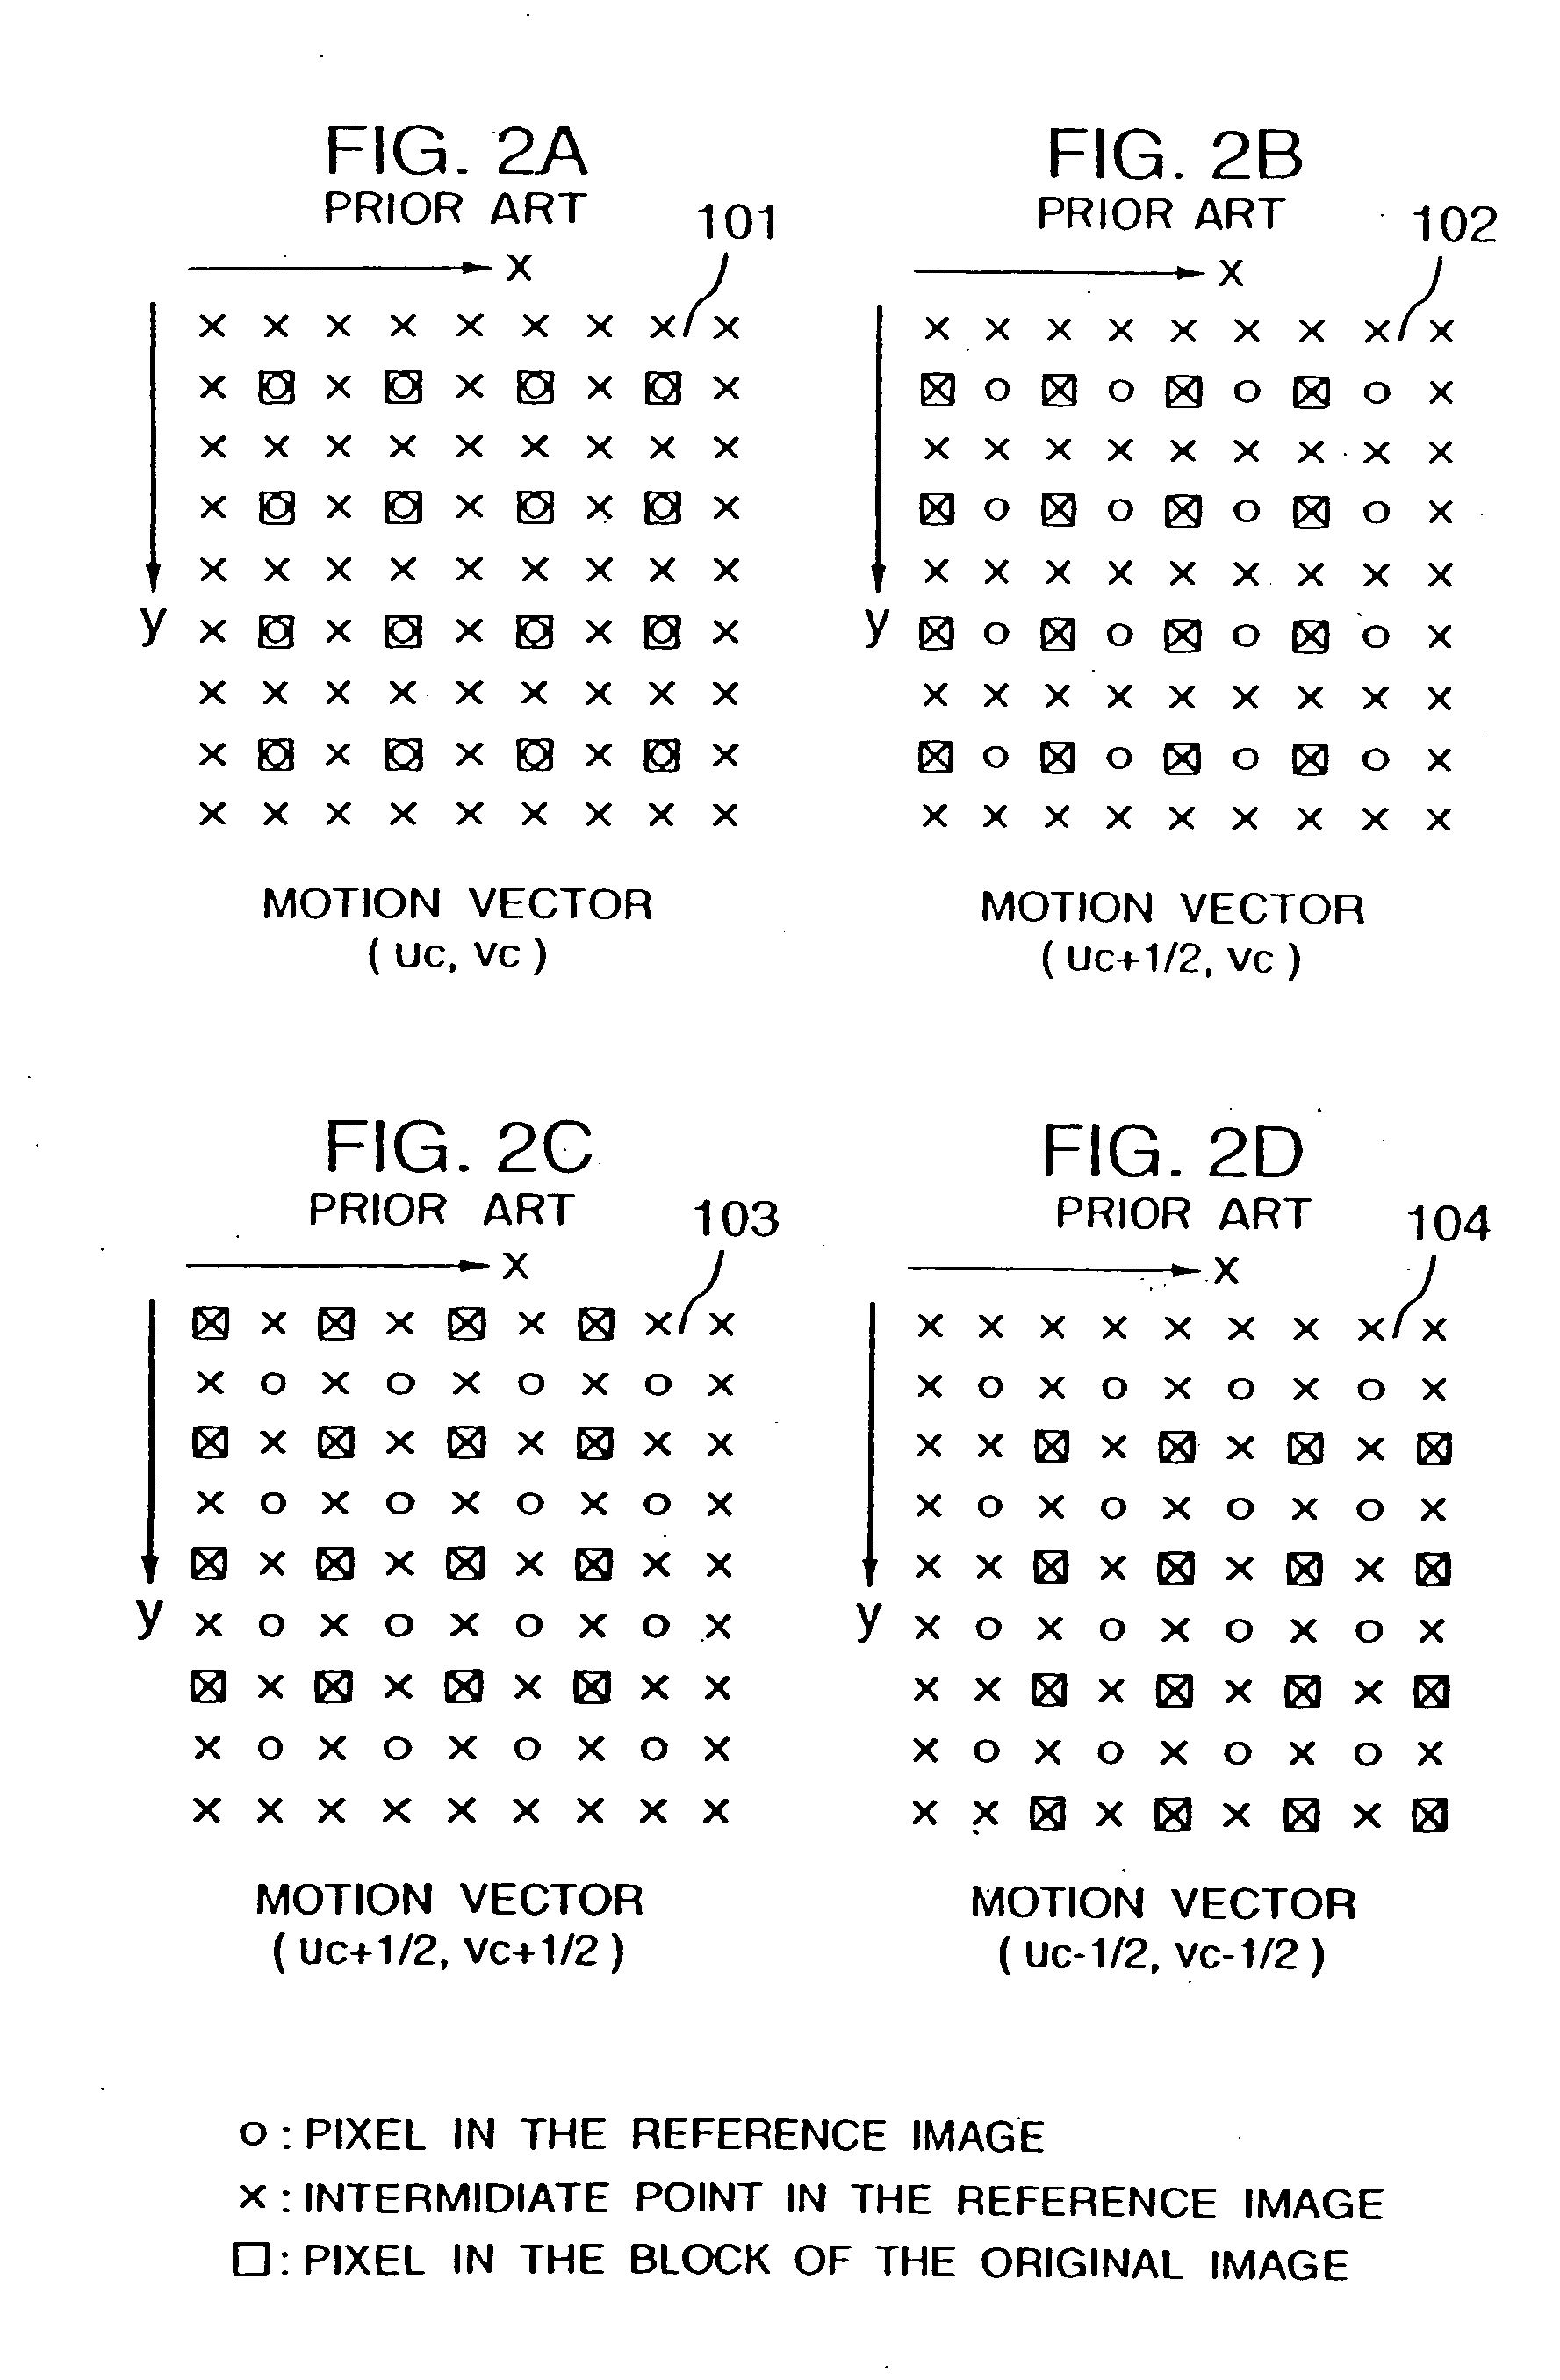 Video coding method and apparatus for calculating motion vectors of the vertices of a patch of an image and transmitting information of horizontal and vertical components of the motion vectors